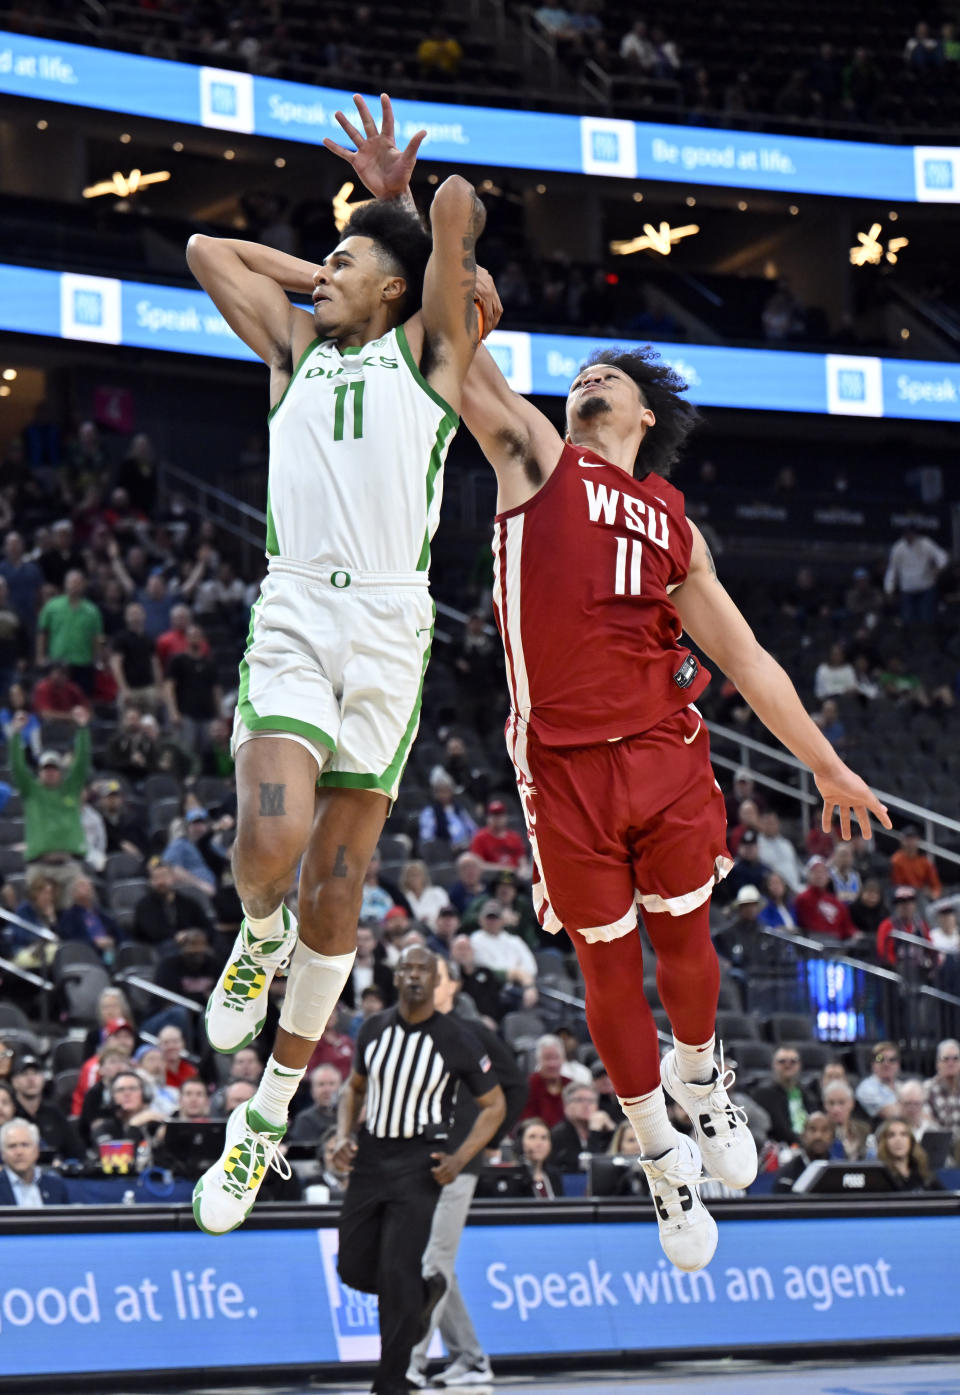 Oregon guard Rivaldo Soares, left, shoots against Washington State forward DJ Rodman during the second half of an NCAA college basketball game in the quarterfinals of the Pac-12 Tournament, Thursday, March 9, 2023, in Las Vegas. (AP Photo/David Becker)